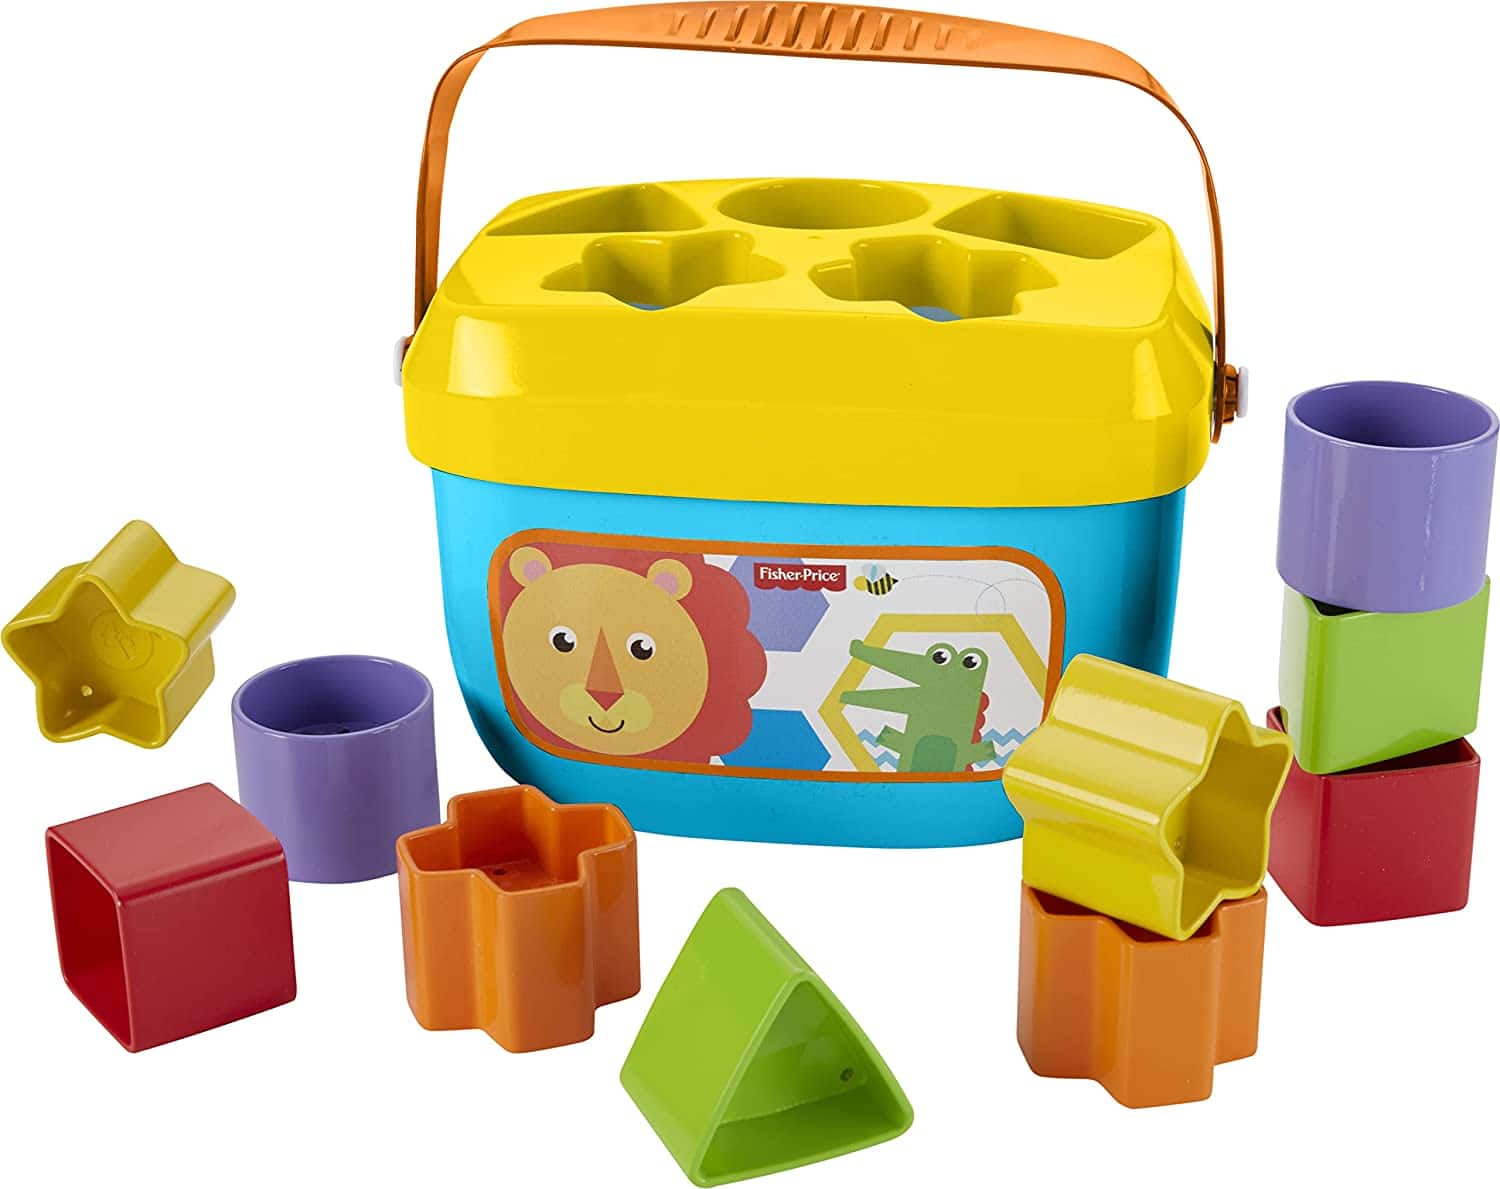 Multi-color shape sorter box with different shapes around it to put inside 